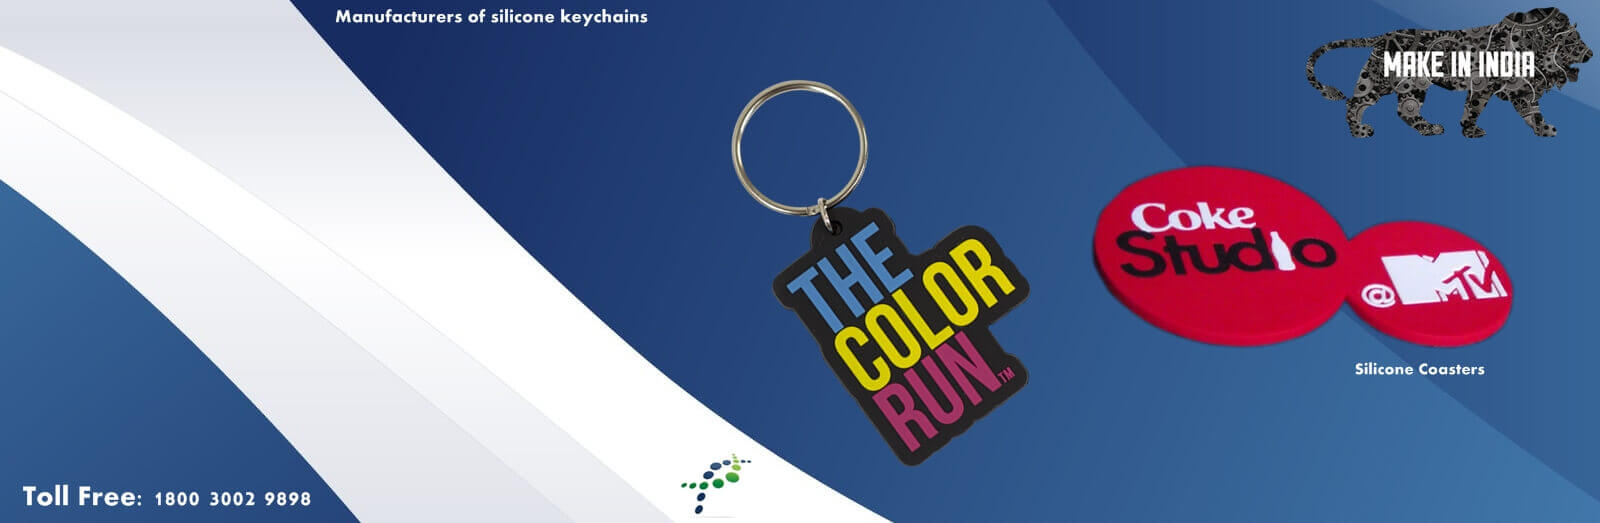 Rubber Keychain Manufacturer in Ahmedabad,Keychain in Ahmedabad,Keychain Manufacturer in Banglore,Promotional Keychain in Ahmedabad,Customized Keychain in Banglore,Keychain Wholesaler in Ahmedabad 